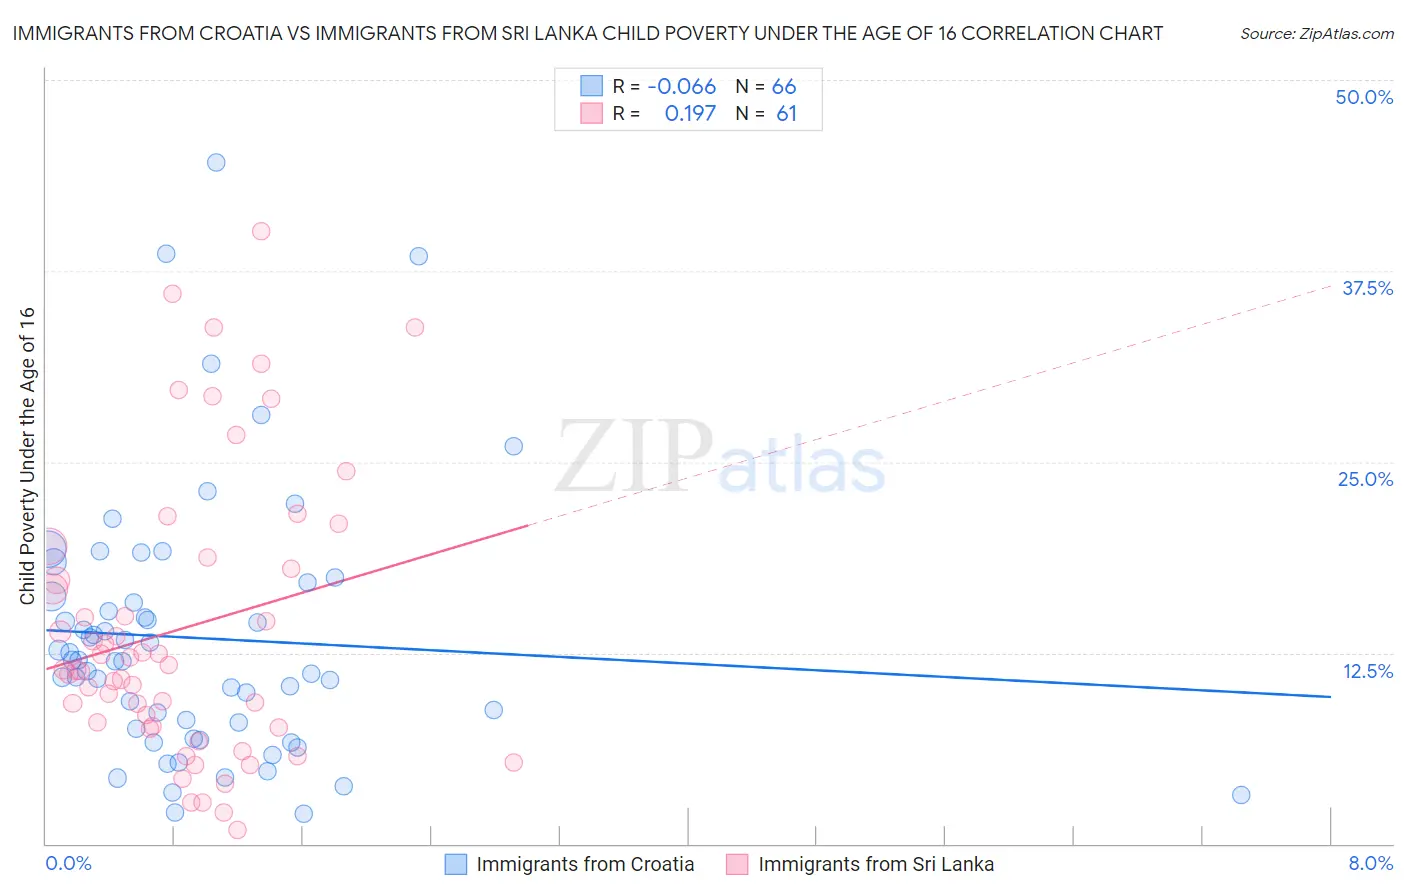 Immigrants from Croatia vs Immigrants from Sri Lanka Child Poverty Under the Age of 16